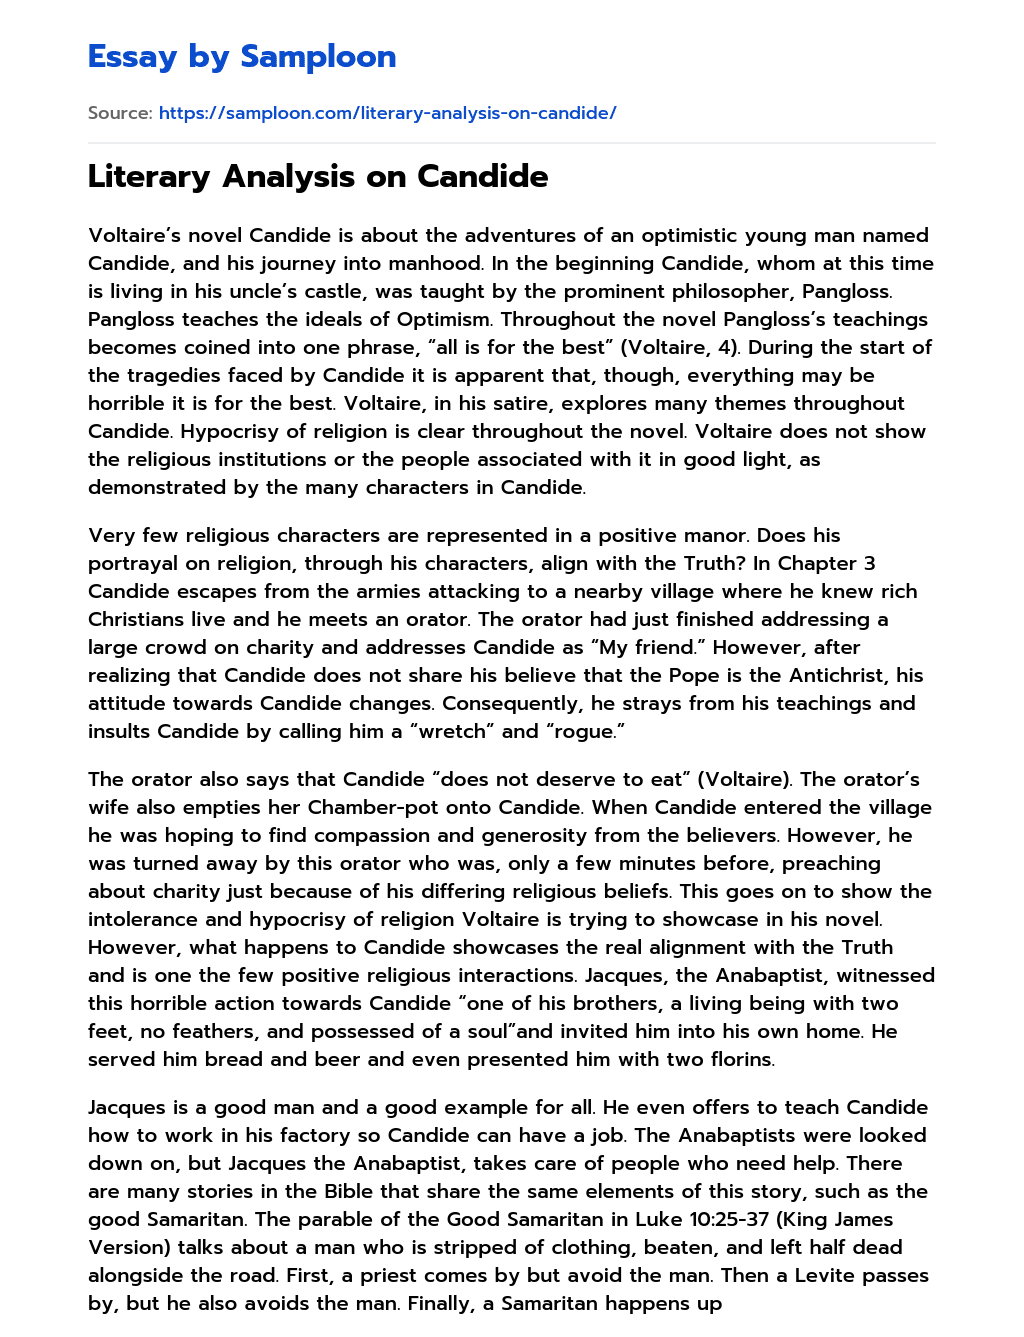 candide character analysis essay